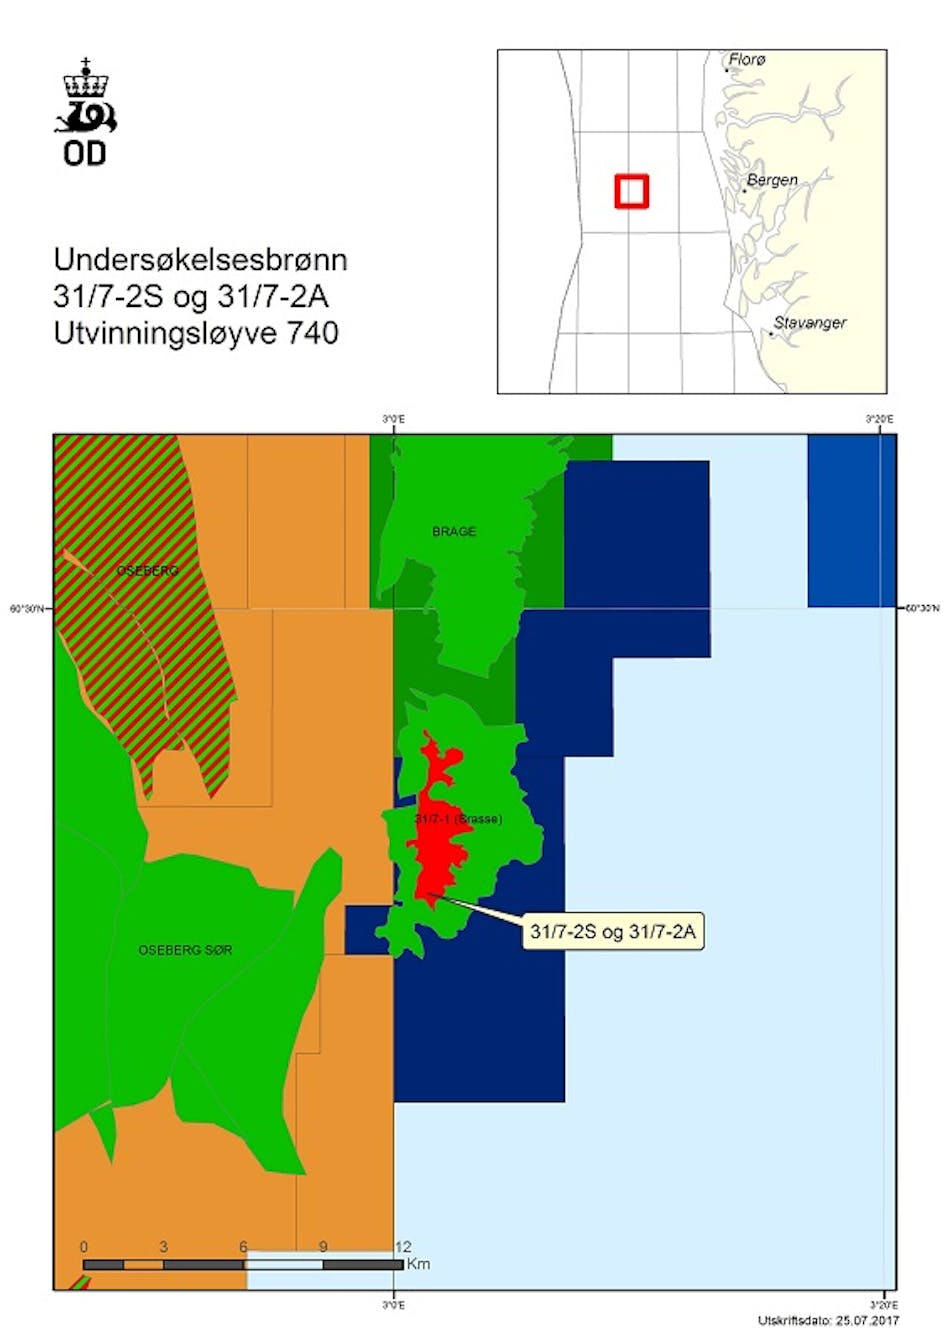 31/7-2S Brasse side track appraisal well in the license PL 740 in the Norwegian North Sea